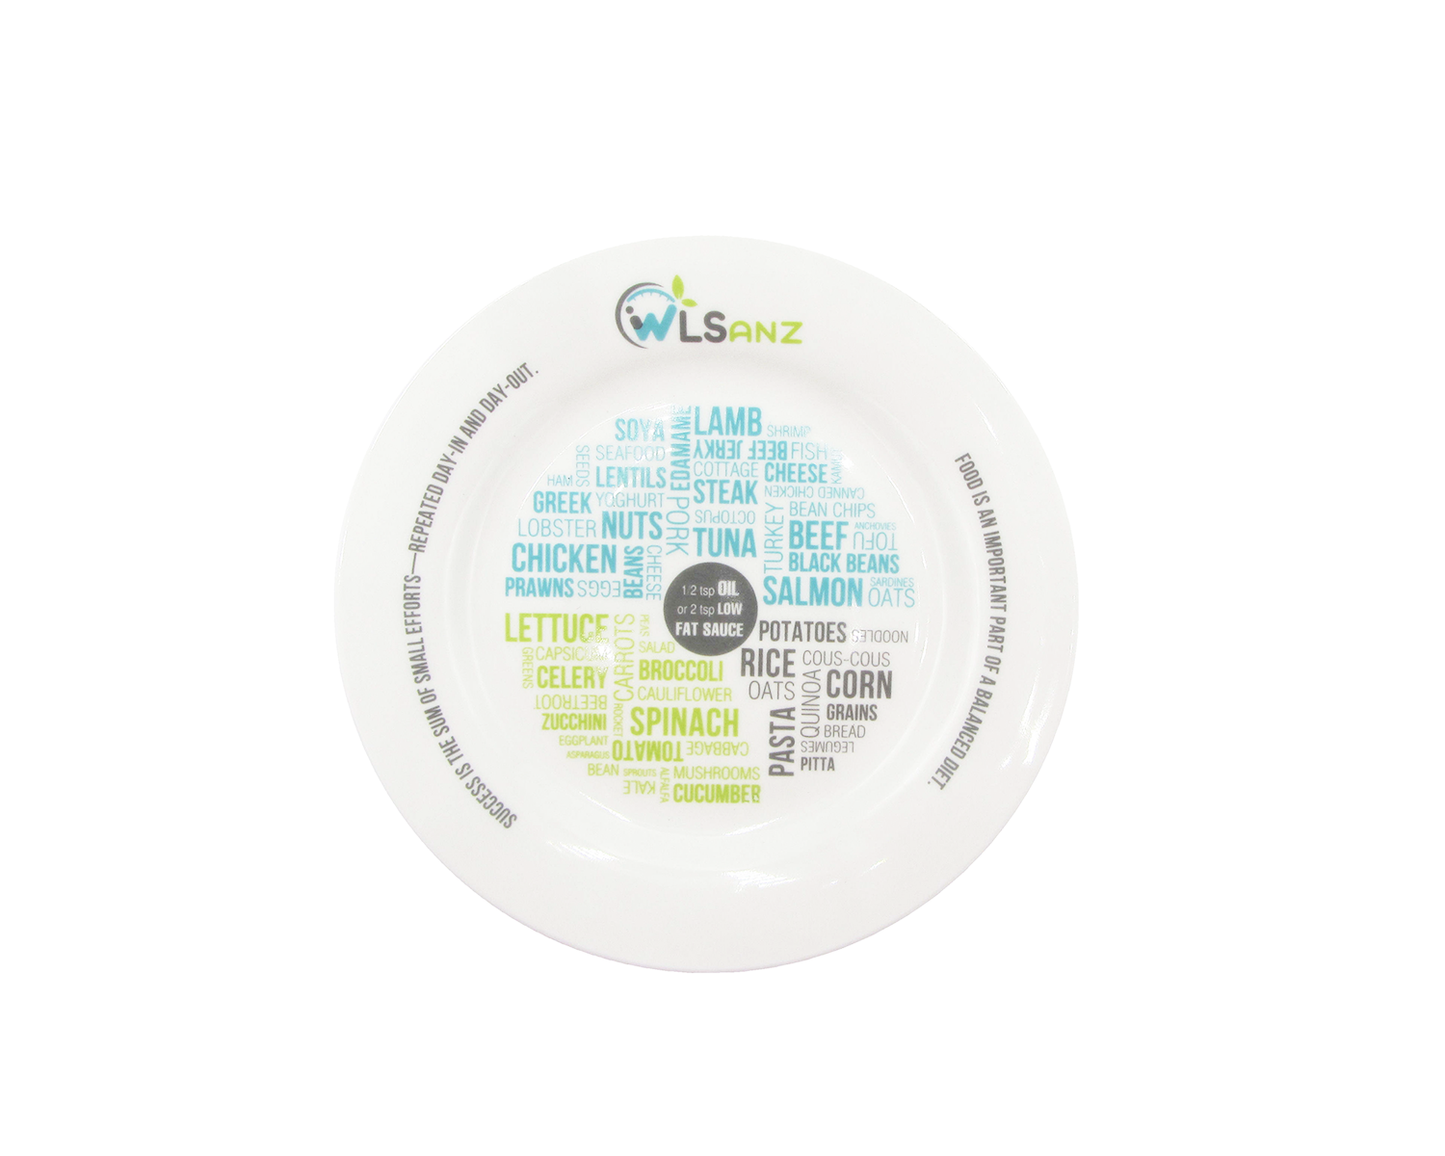 Portion Control Plate & Bowl Set by BariatricPal by BariatricPal -  Exclusive Offer at $19.98 on Netrition